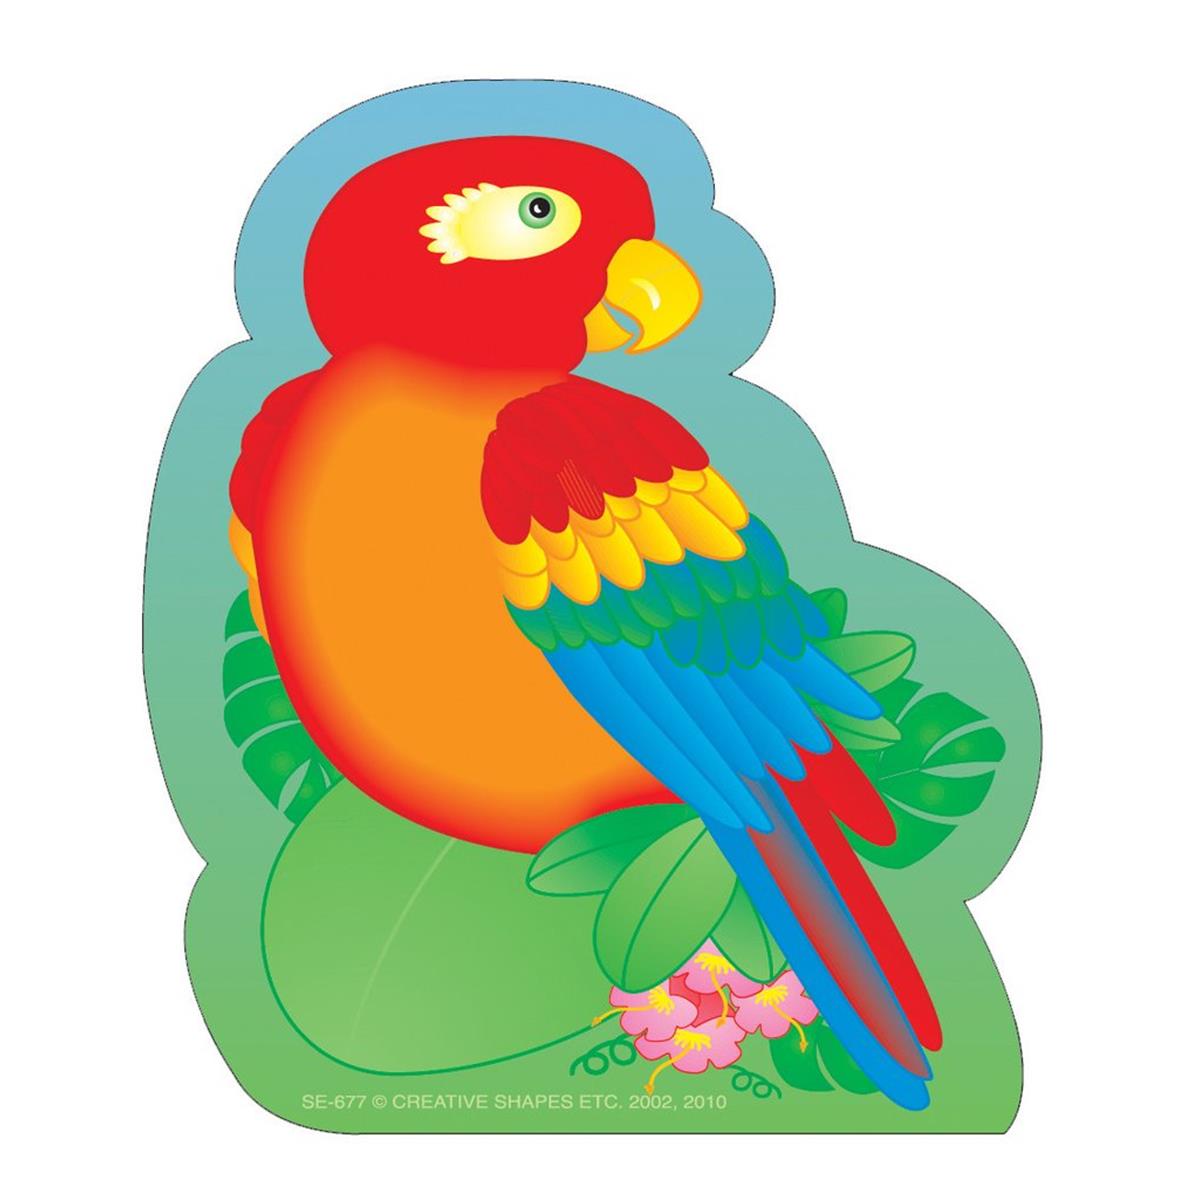 Se-0677 4.5 X 4 In. Mini Notepad, Parrot - 35 Sheets Per Pack